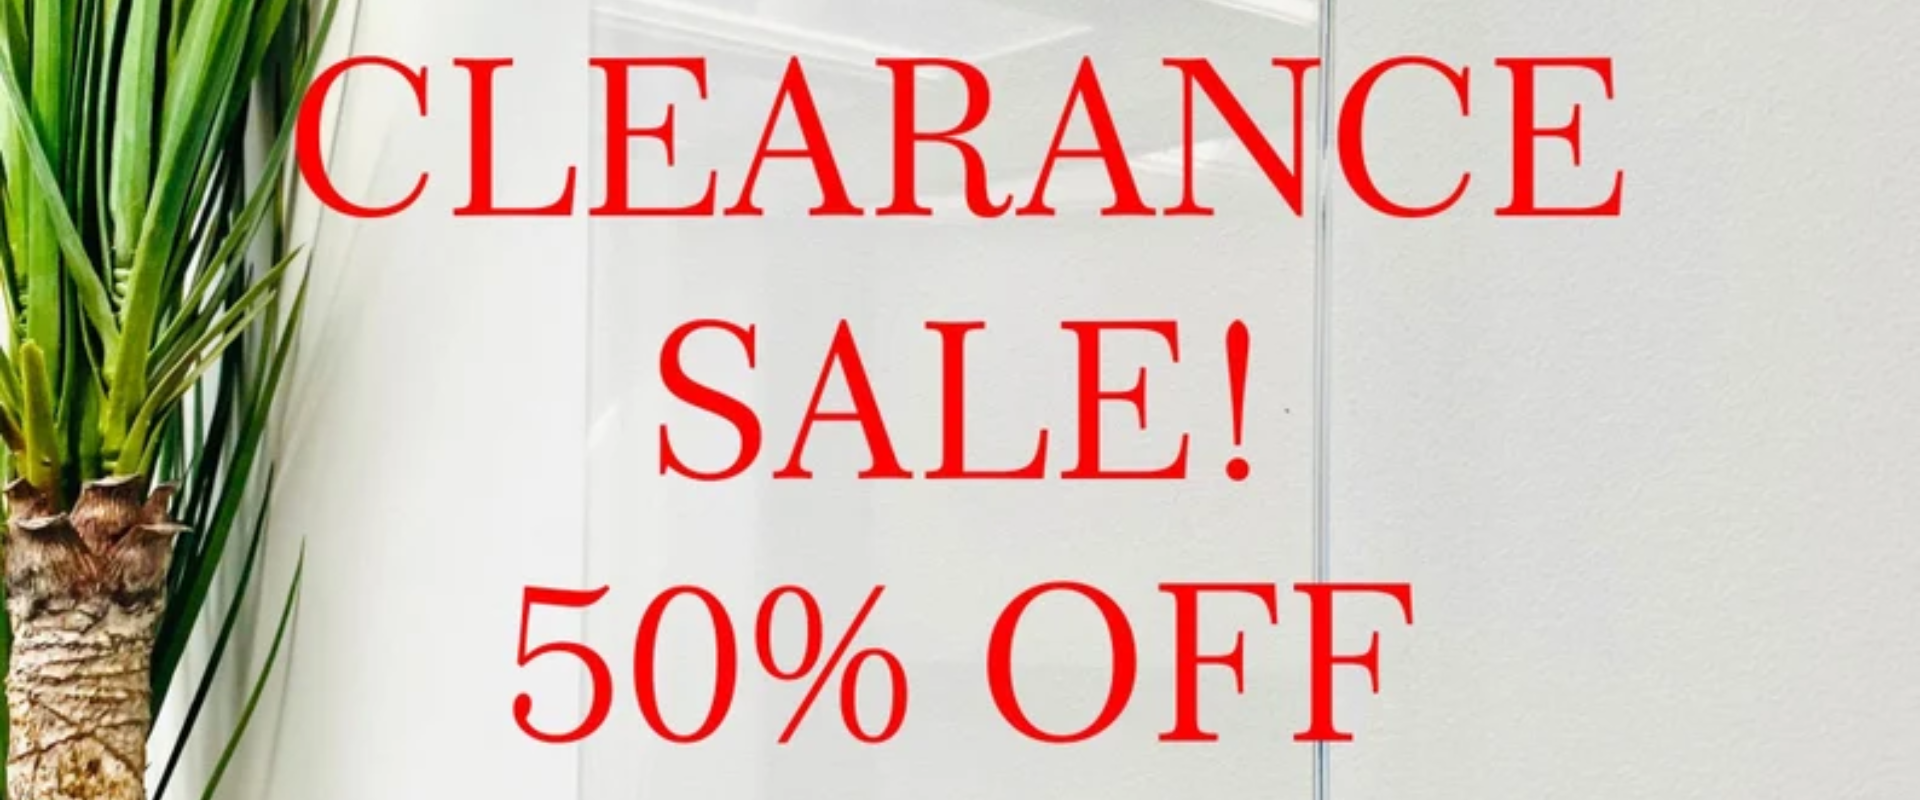 Acrylic Dry Erase Writing Board clearance sale, 50% off.